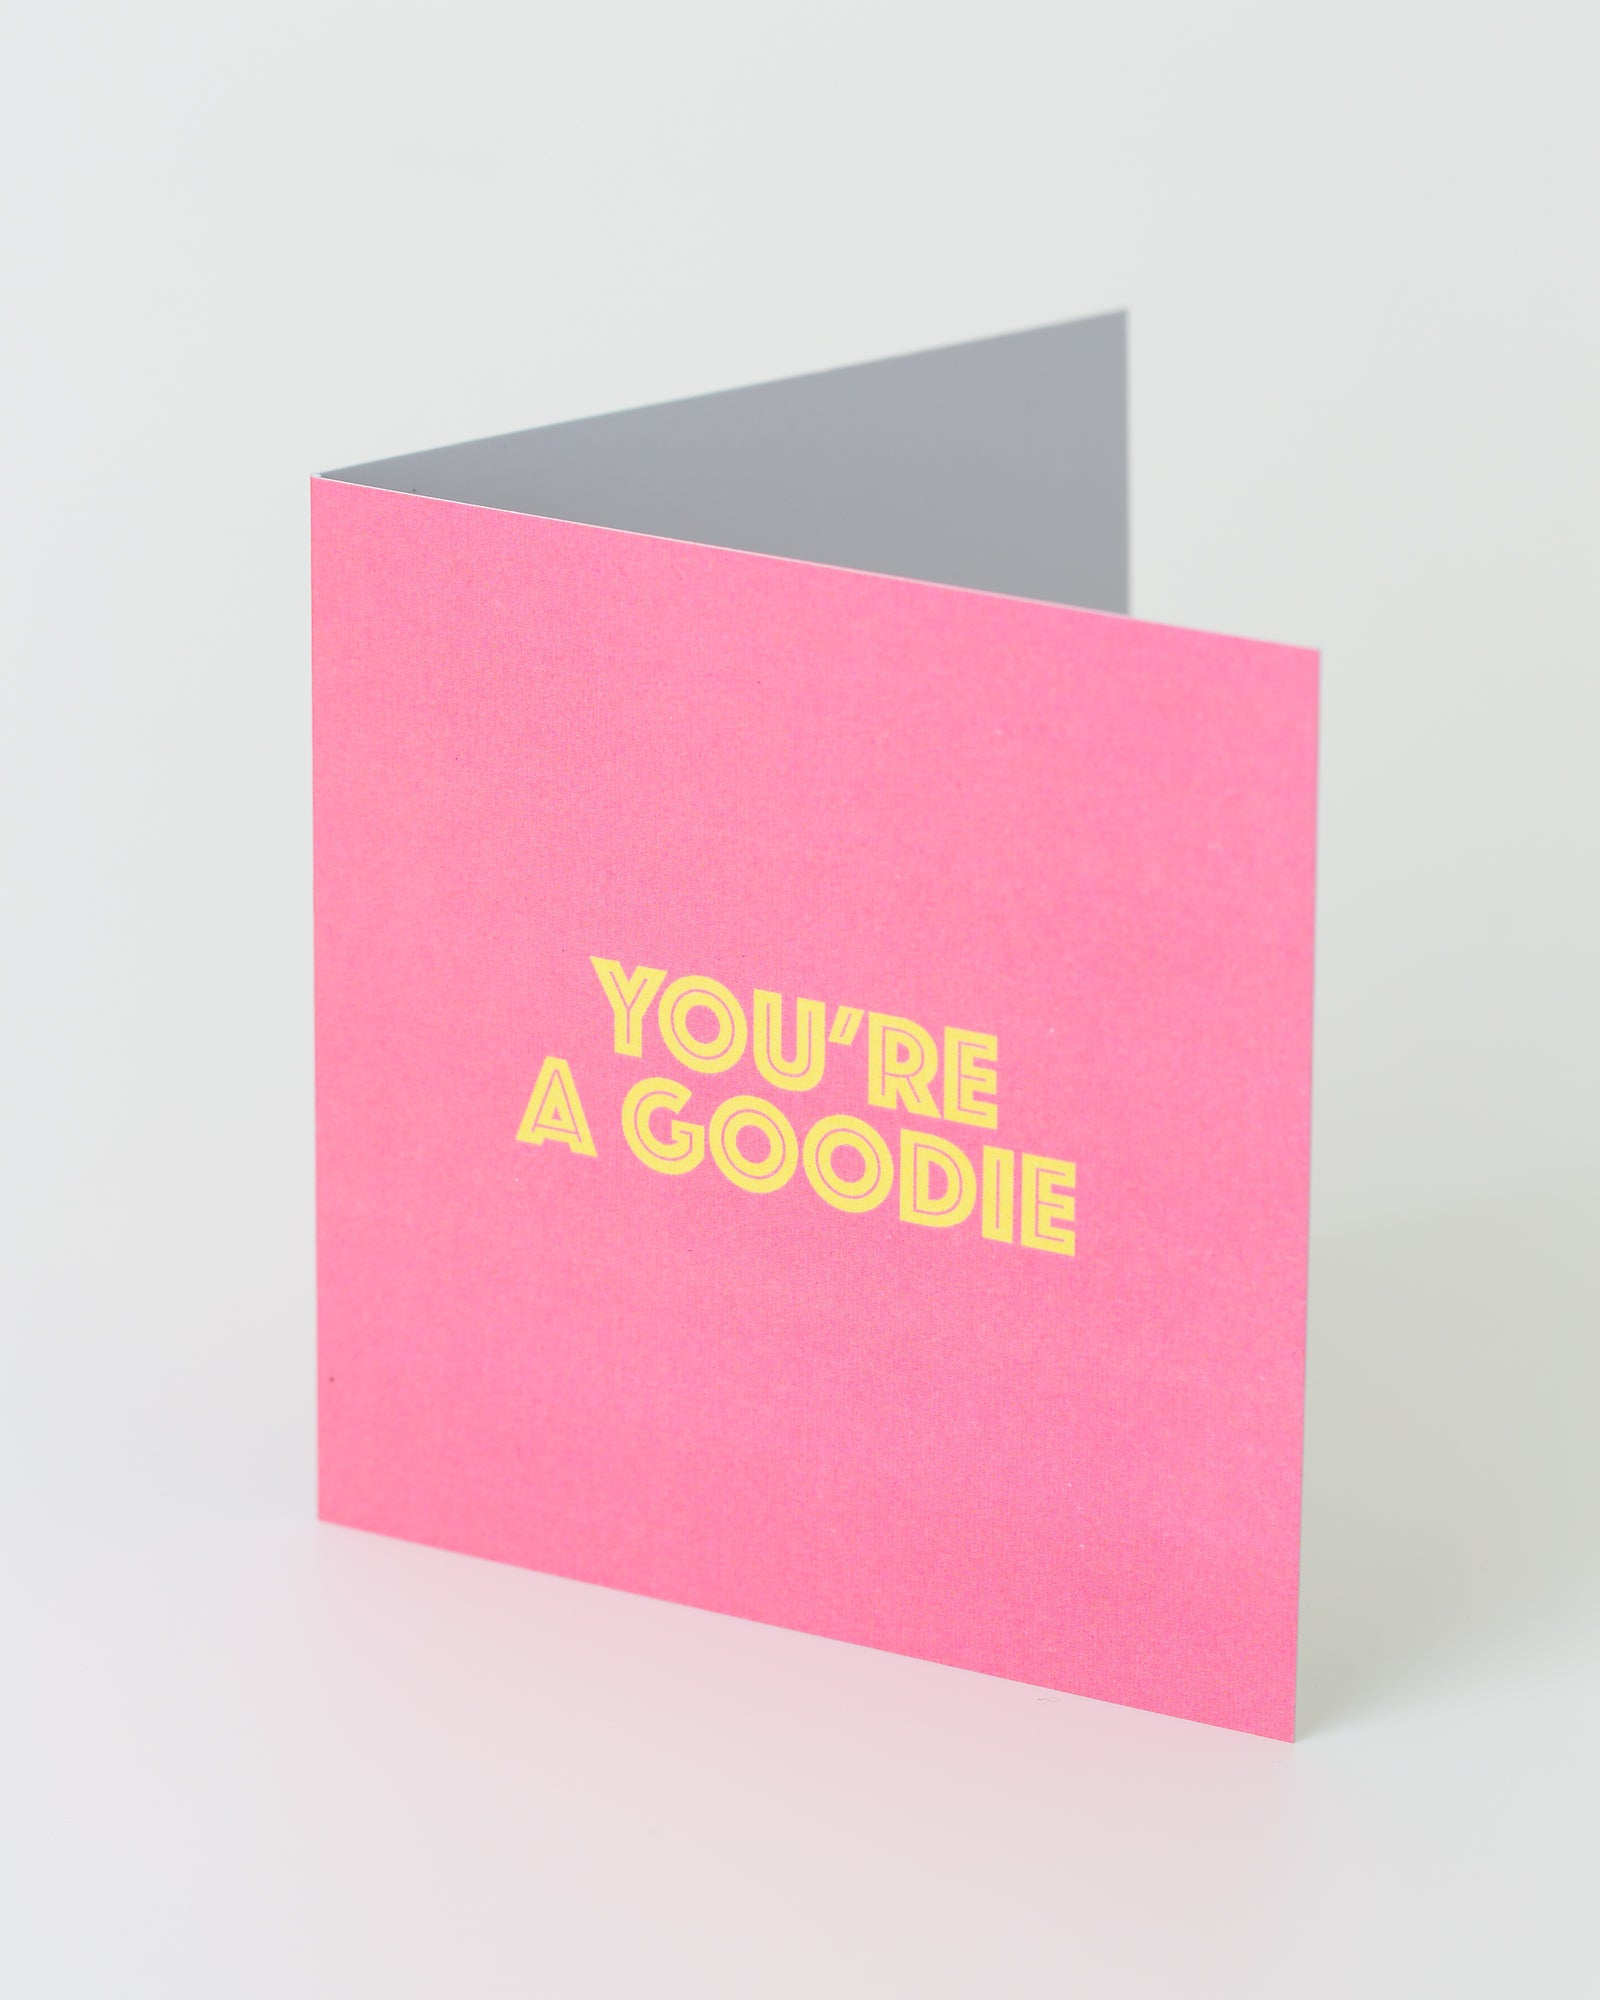 'You're a goodie' greeting card